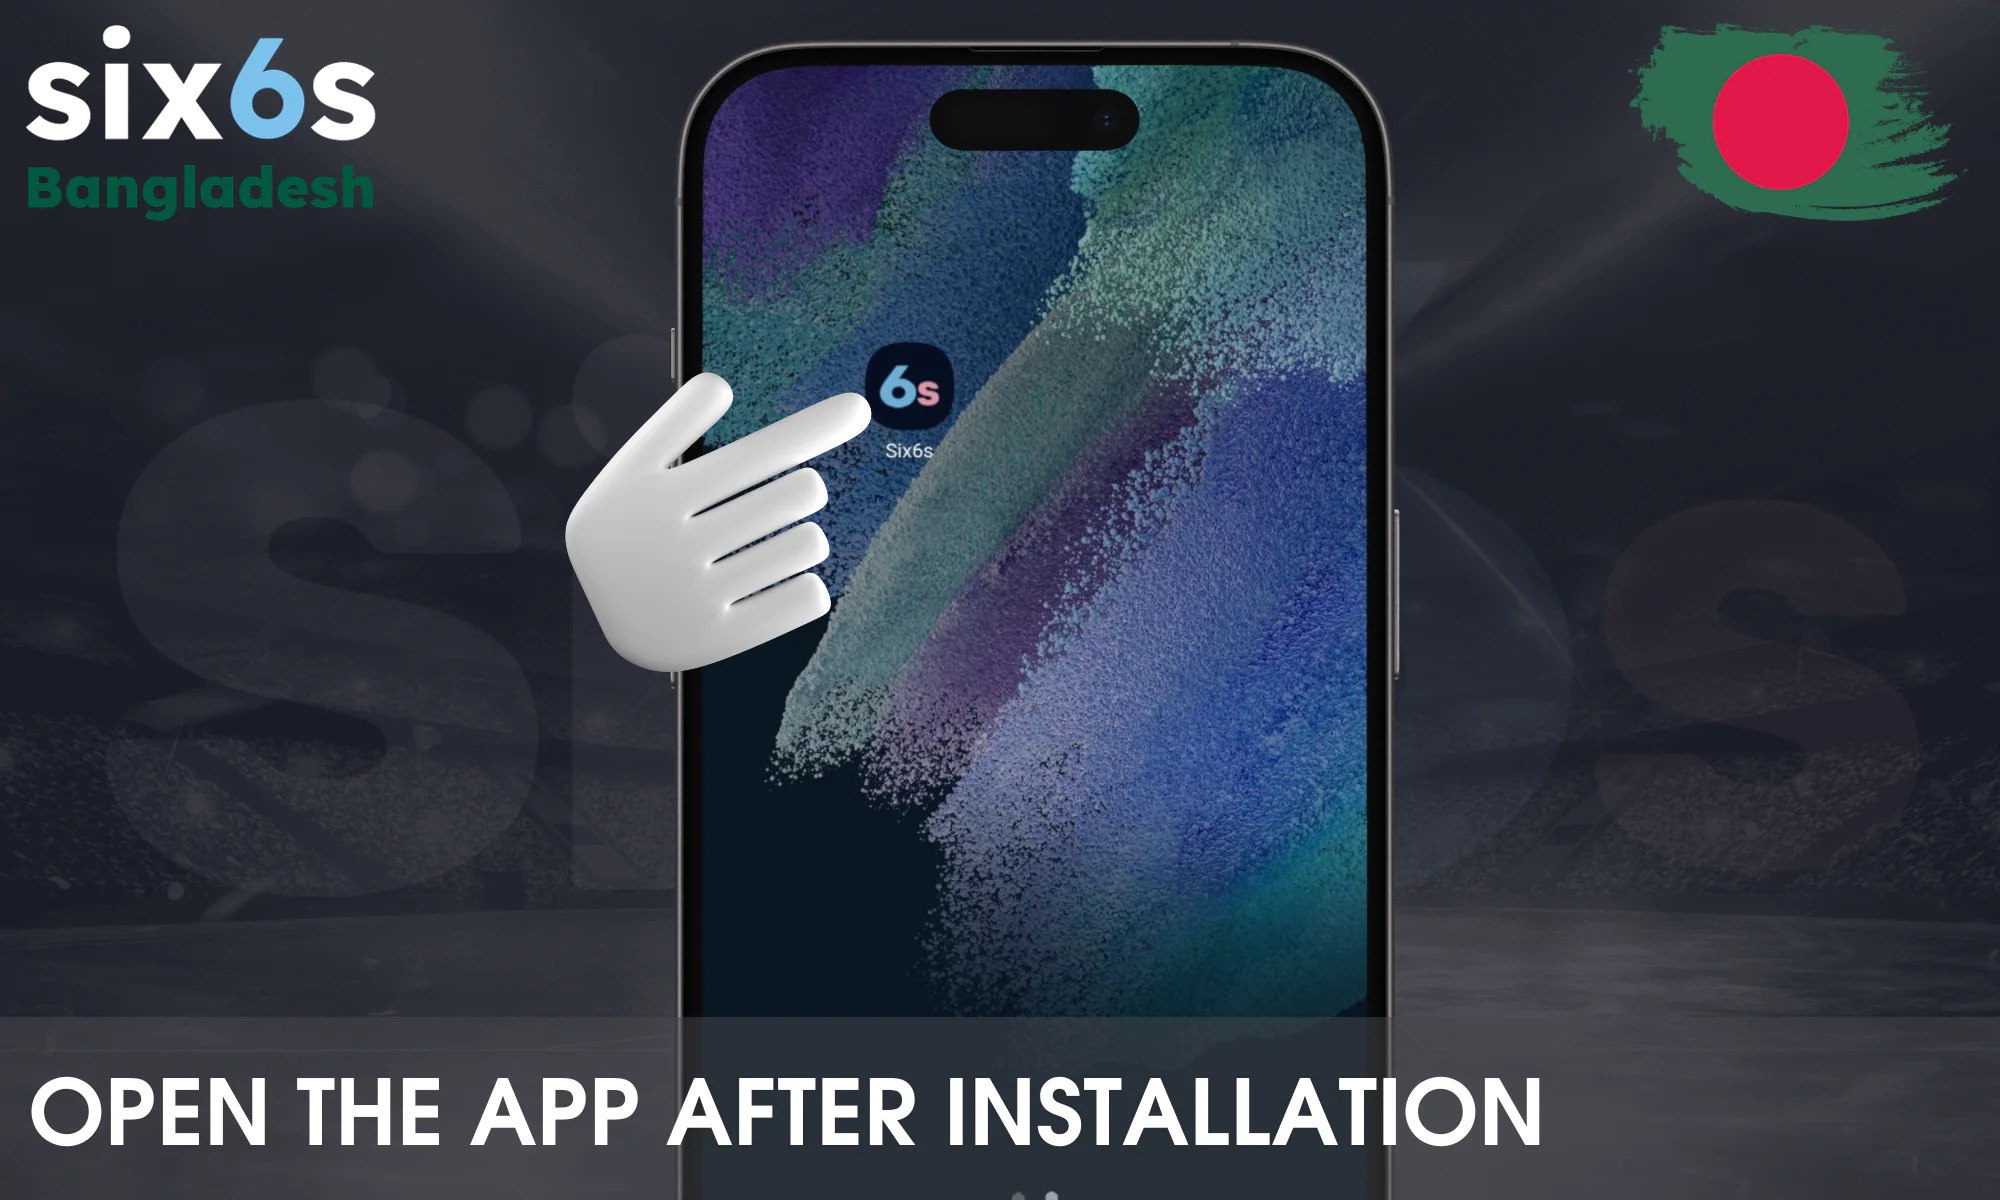 Open the installed application